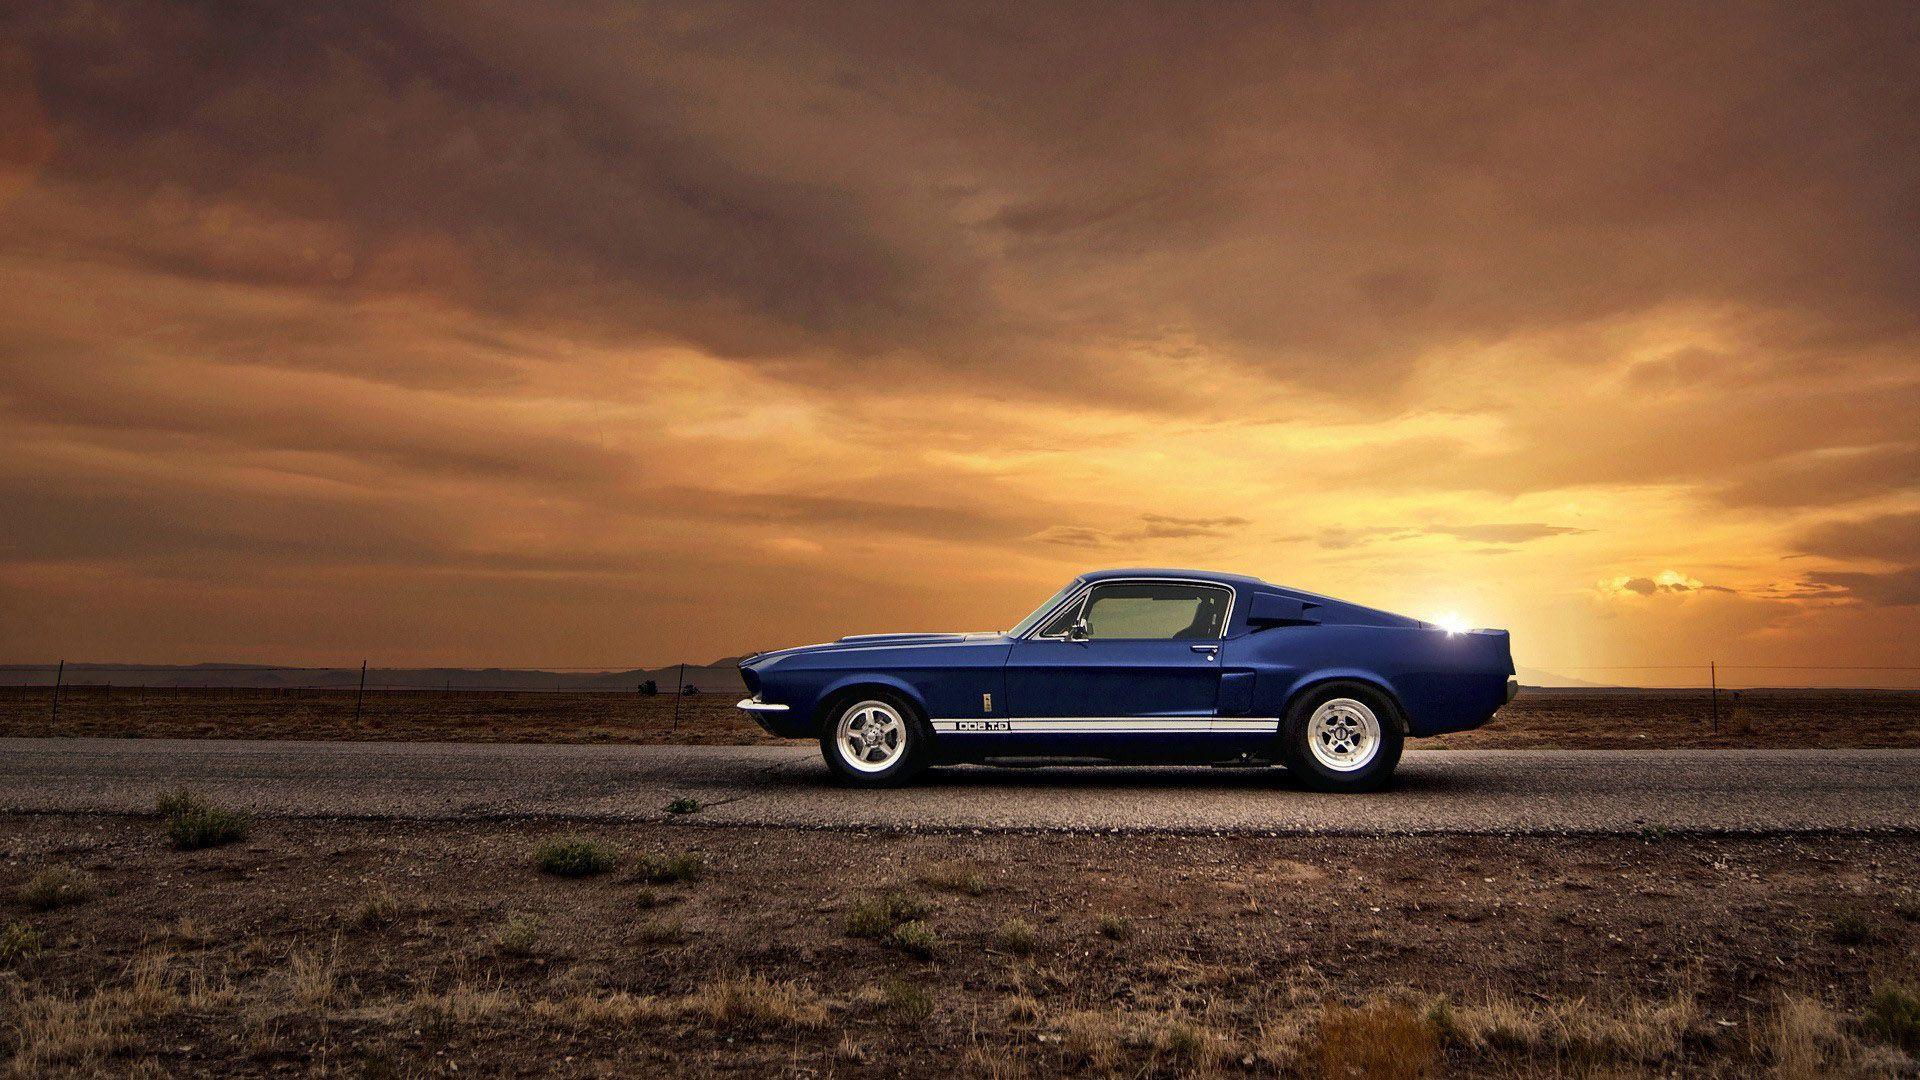 Background Wallpaper Classic Mustang. All About Gallery Car